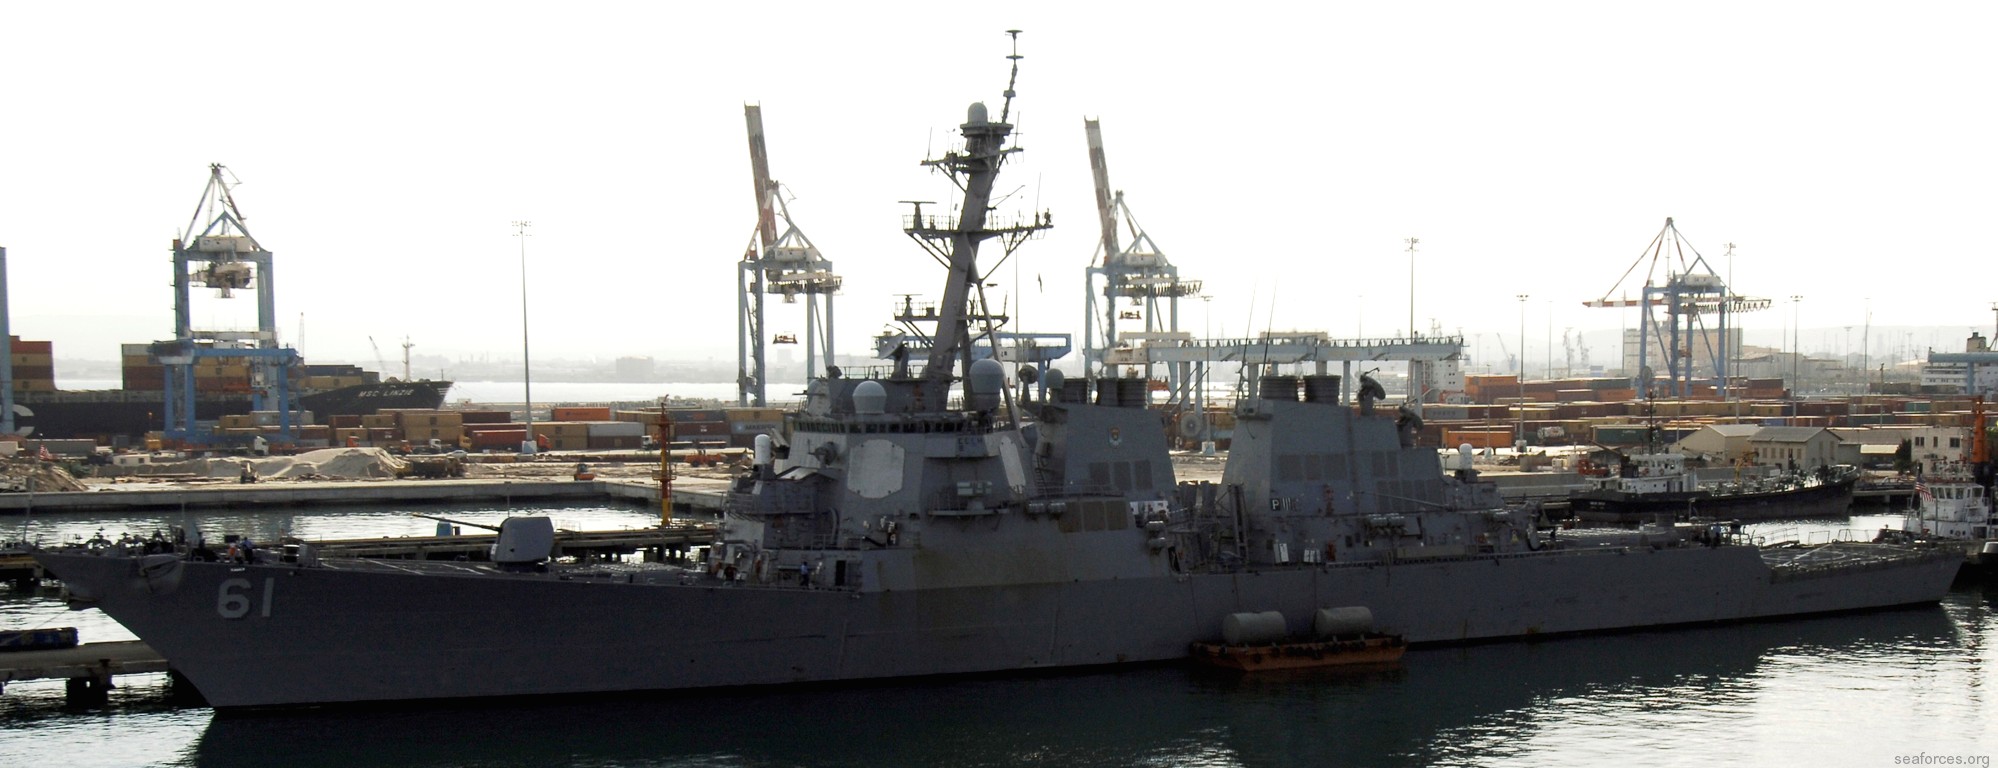 ddg-61 uss ramage guided missile destroyer us navy 46